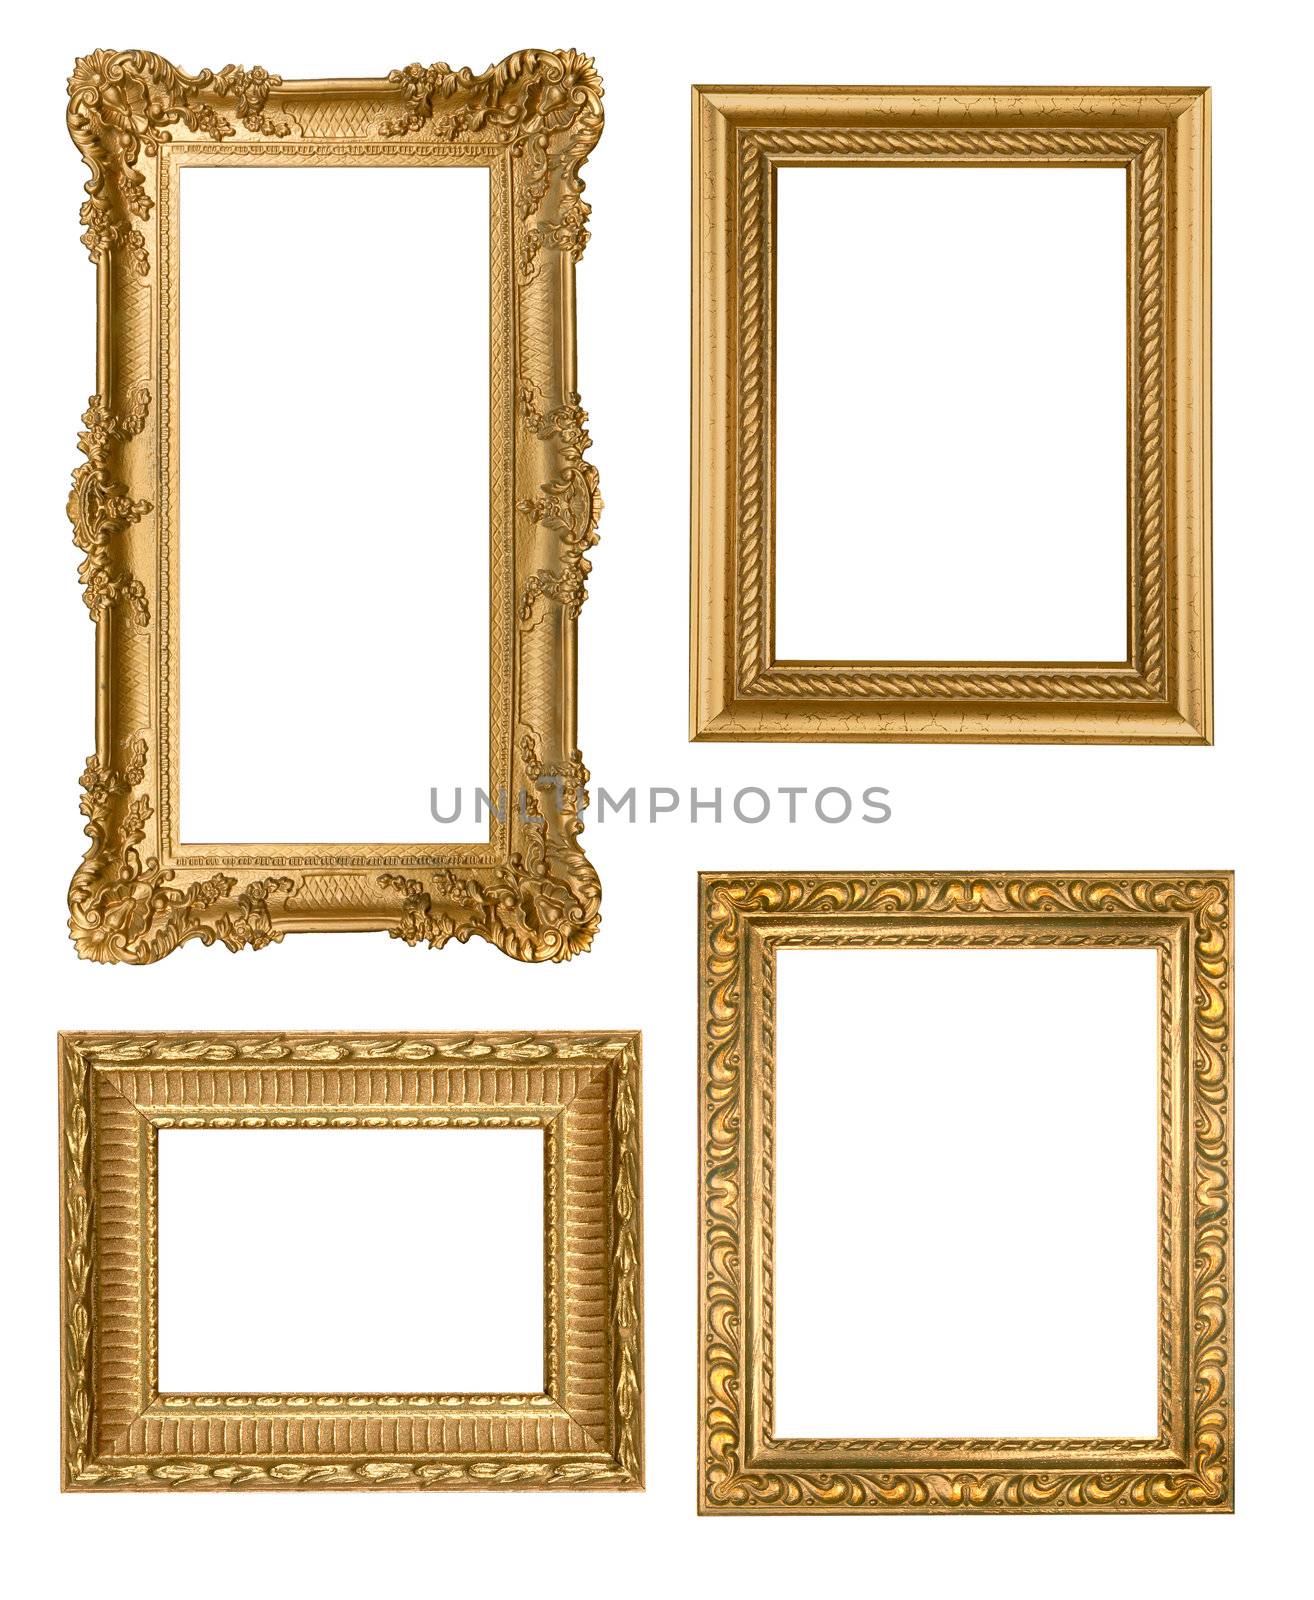 Decorative Gold Empty Wall Picture Frames Insert Your Own Design